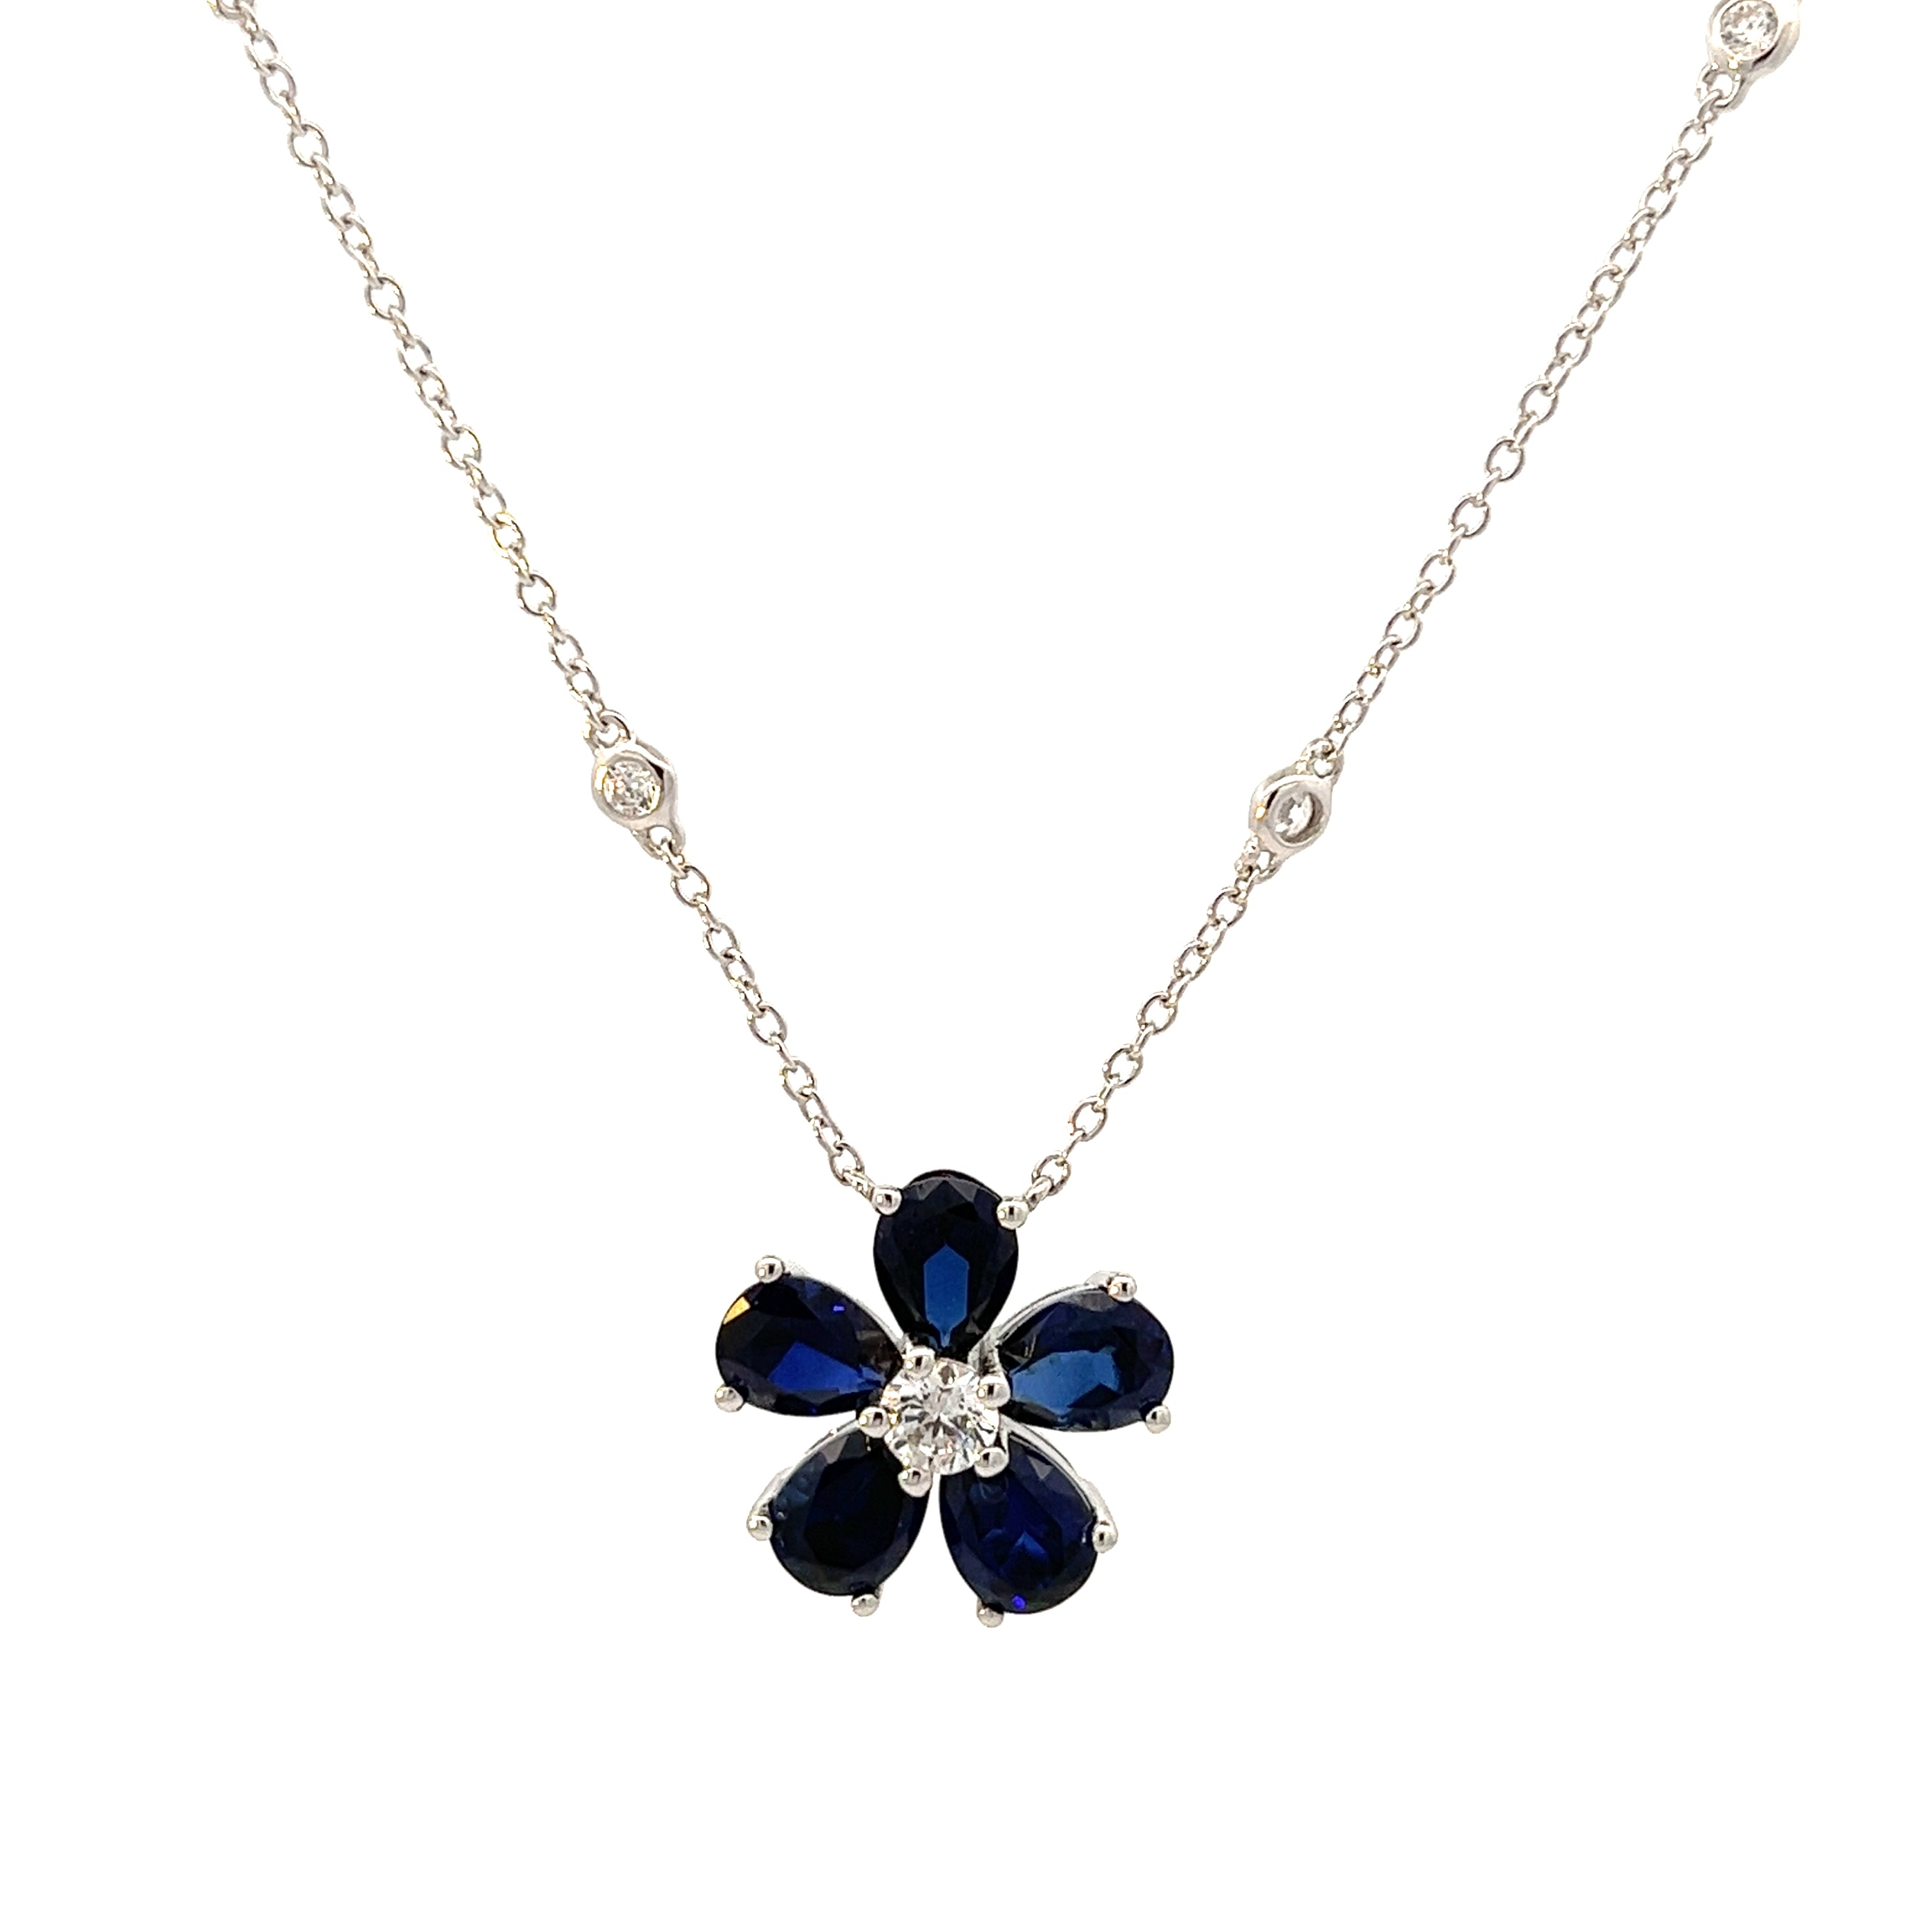 Flower Silver Necklace